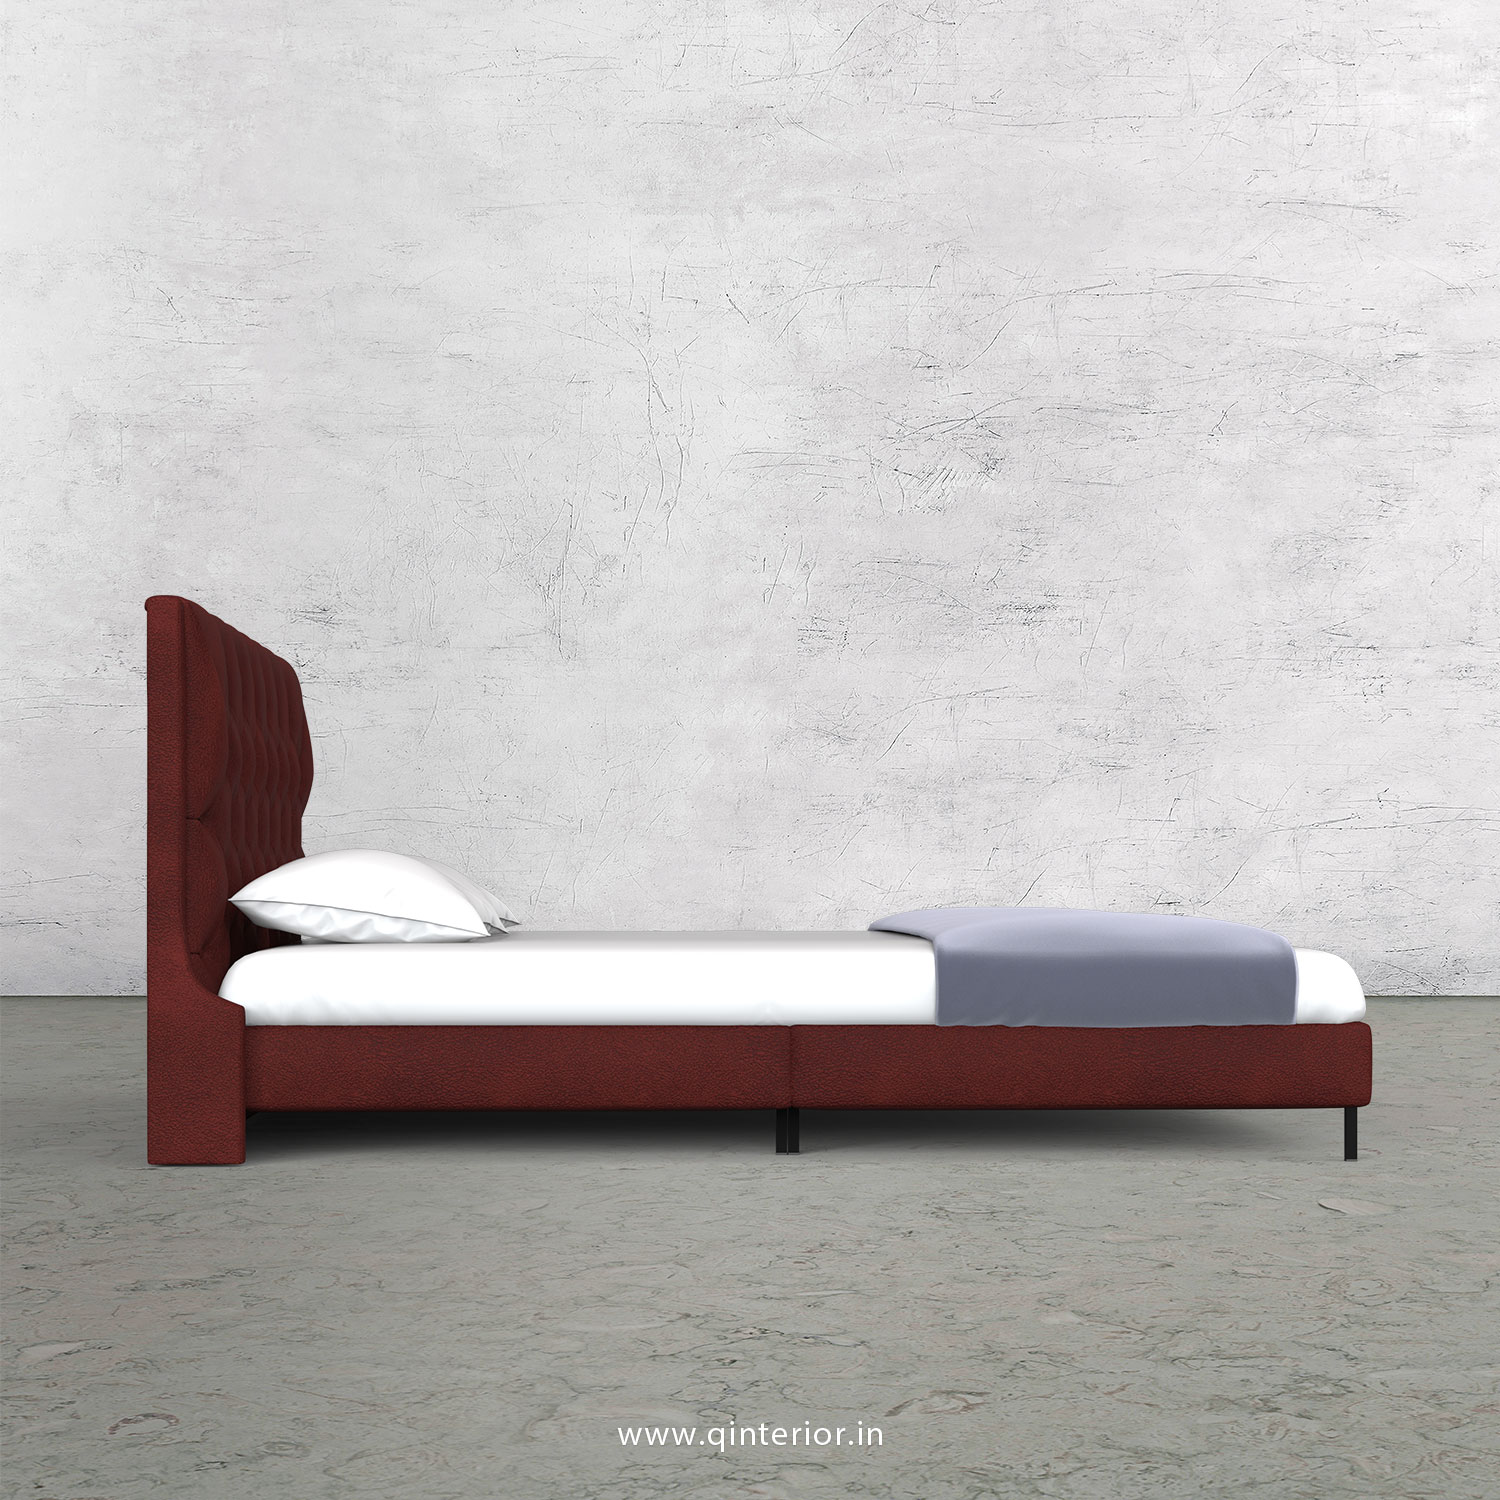 Scorpius King Size Bed in Fab Leather Fabric - KBD003 FL08